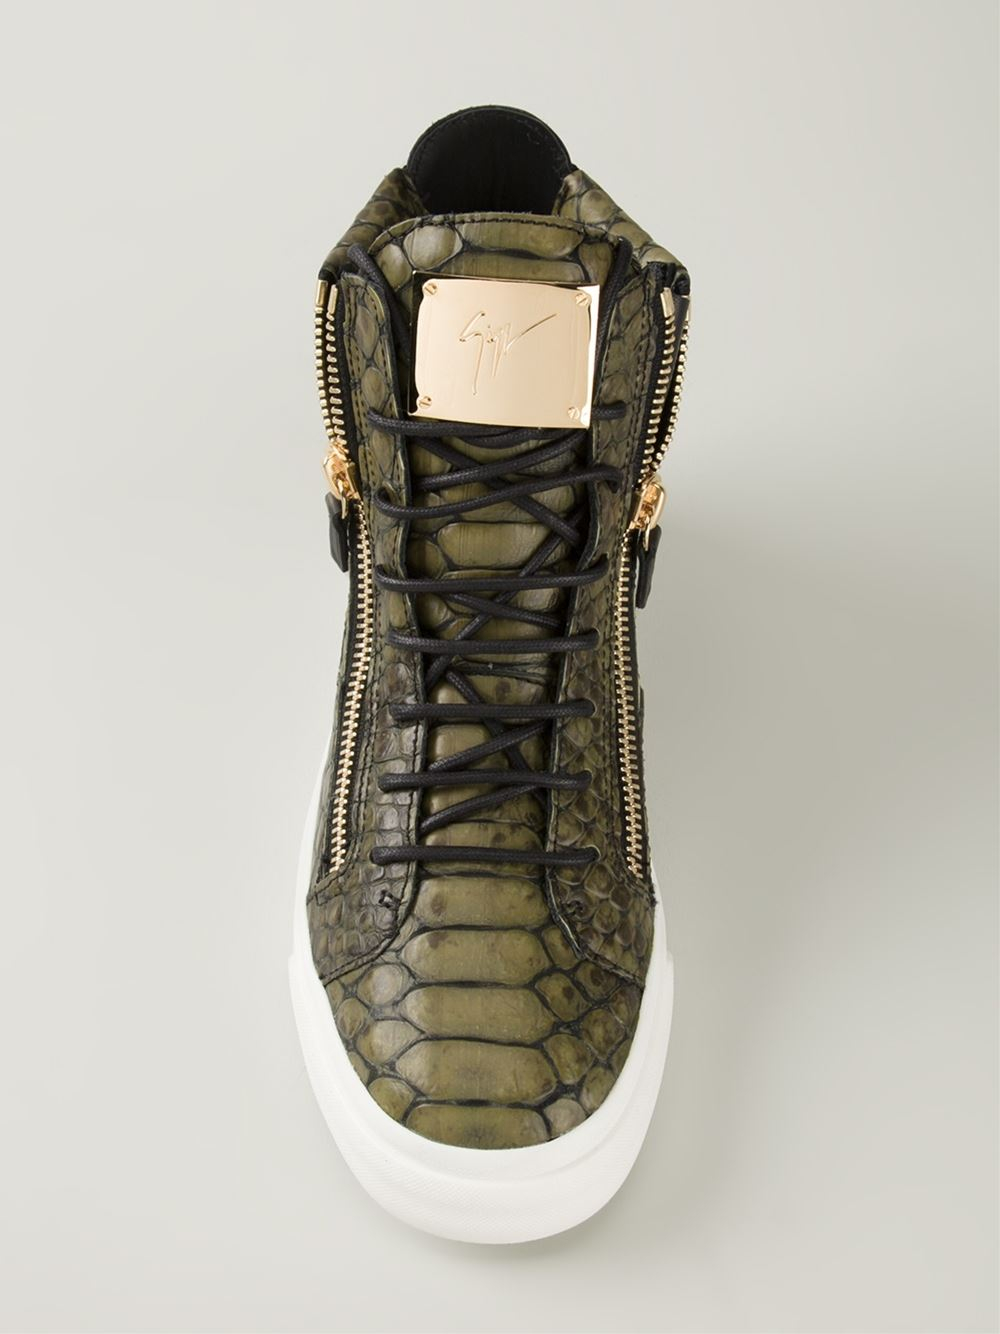 Giuseppe Zanotti Croc-Embossed Leather High-Top Sneakers in Green for Men -  Lyst